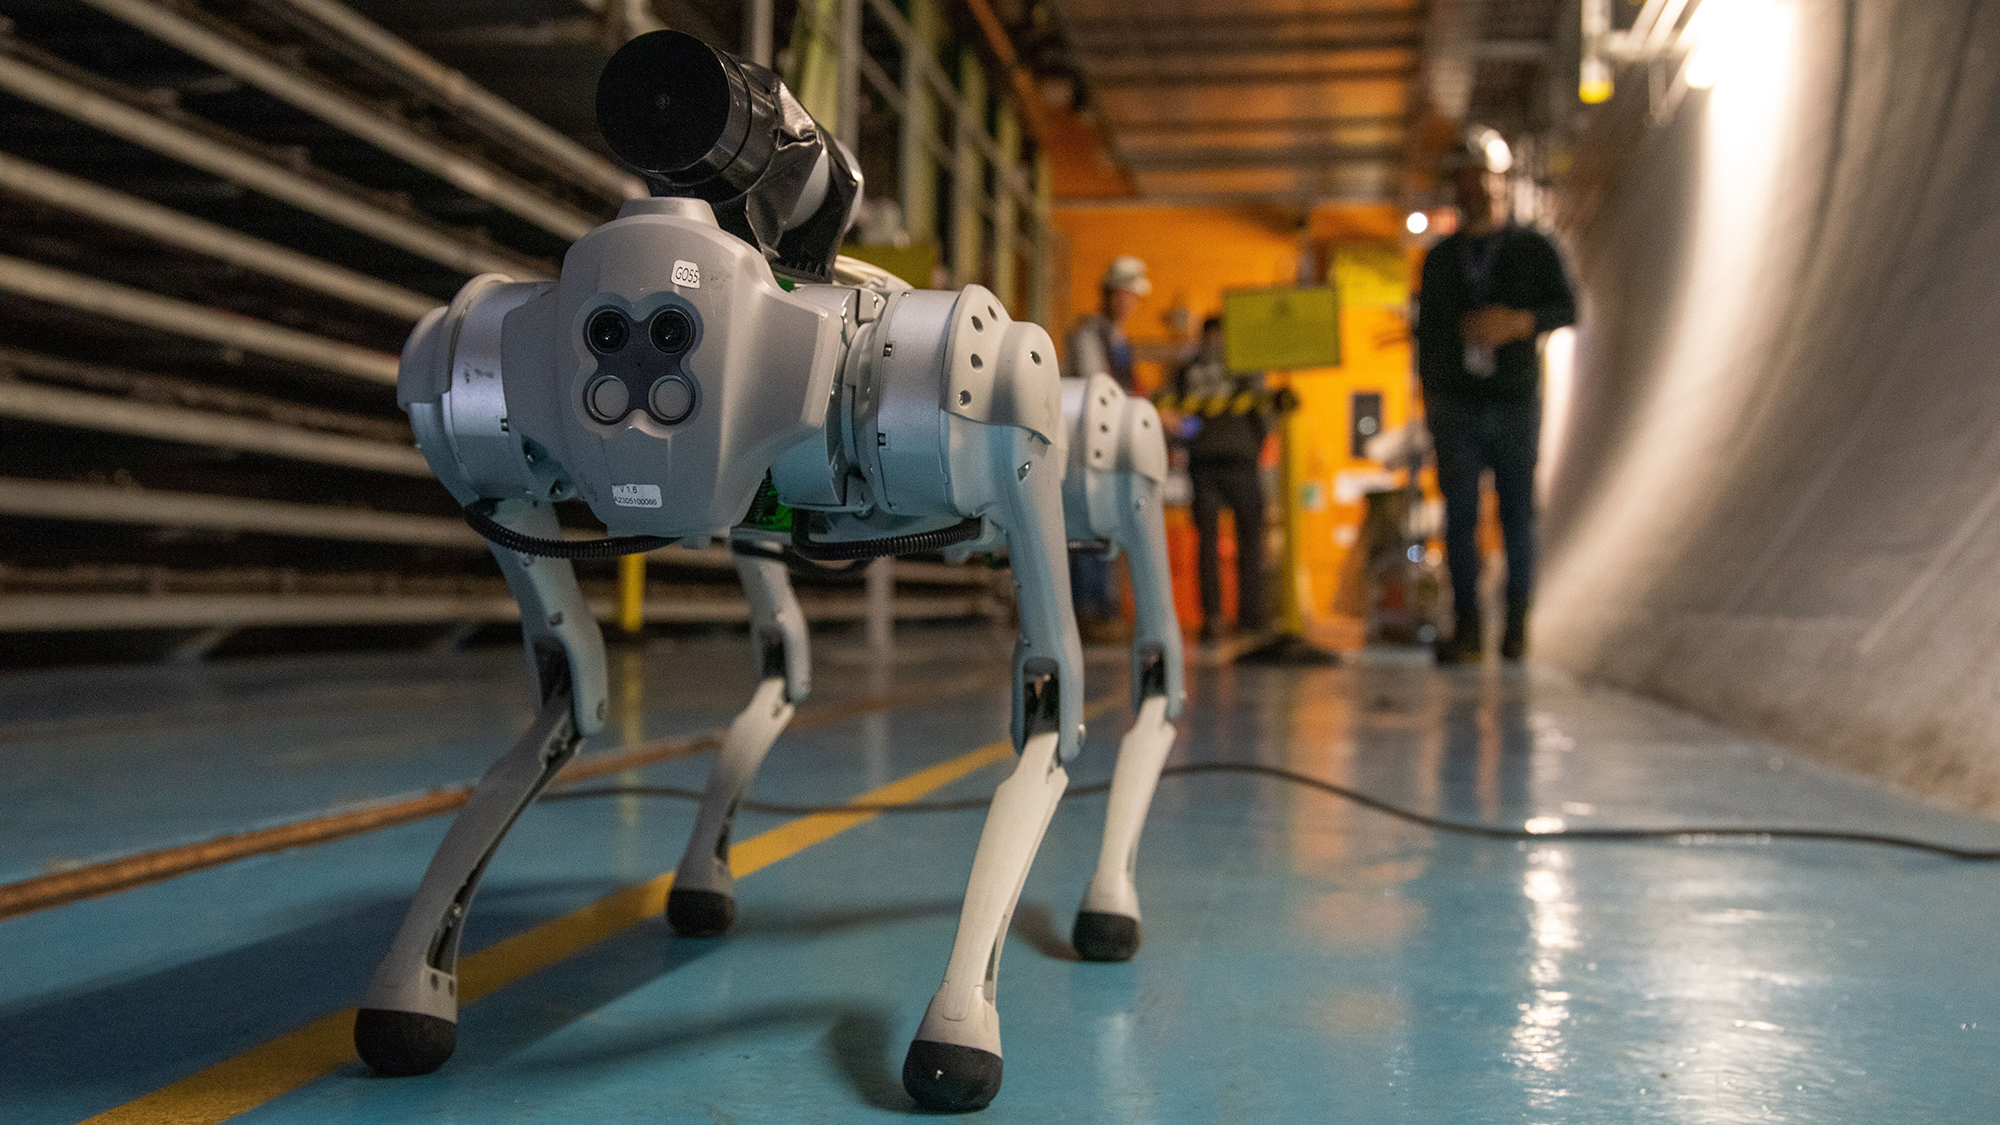 Caption: CERT’s four-legged Robodog can manuevuer throguh cramped spaces and use sensors to spot fires, leaks, or other hazards.